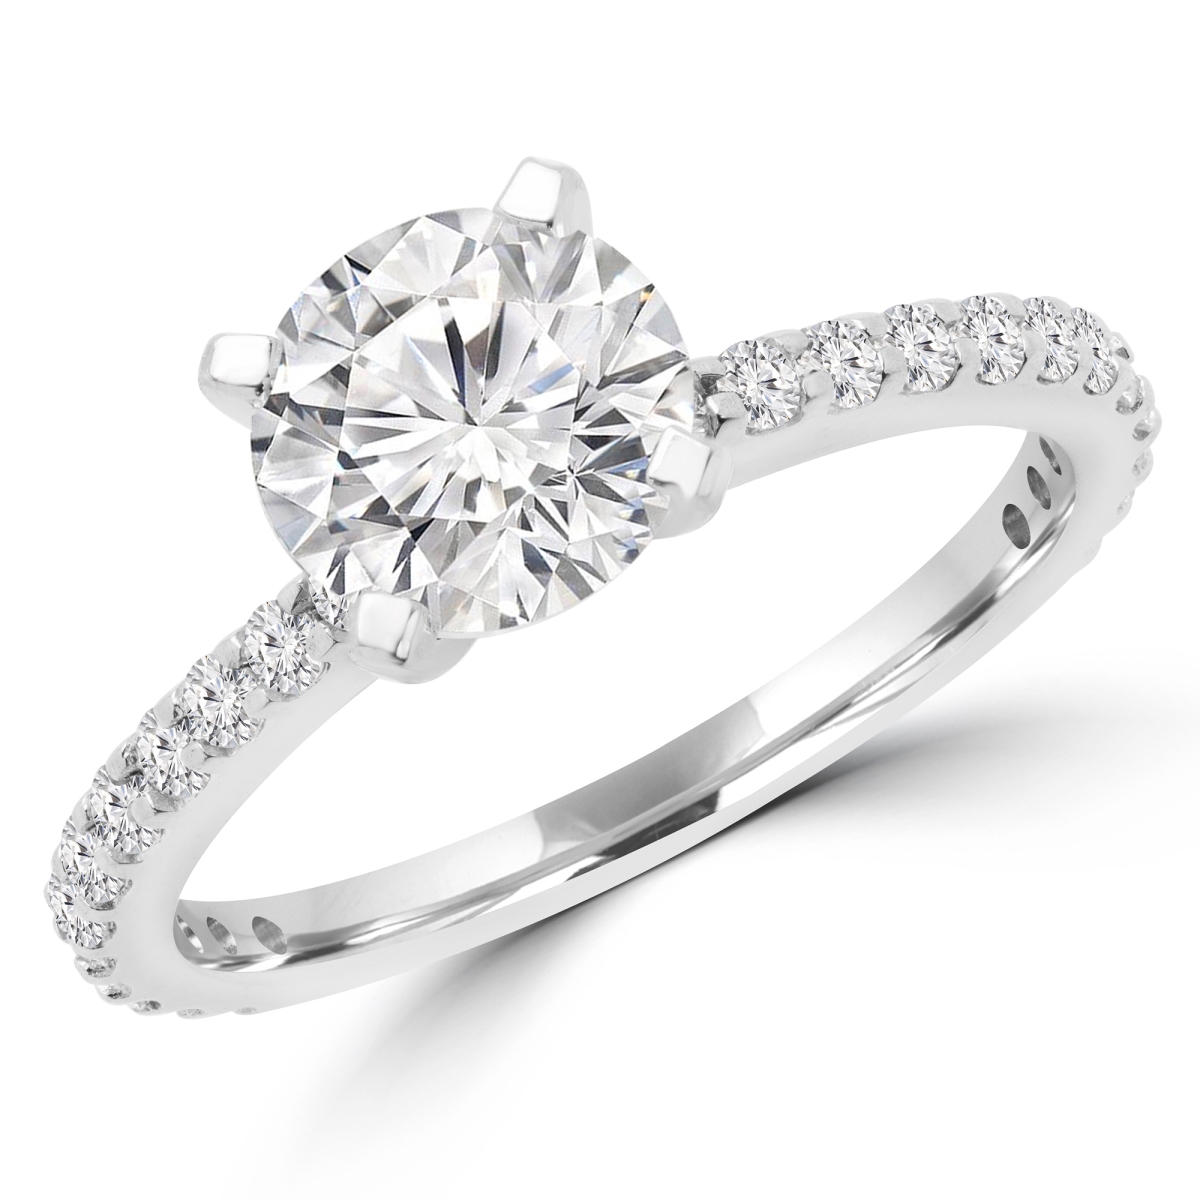 Picture of Majesty Diamonds MD170246-8.5 0.9 CTW Round Diamond Solitaire with Accents Engagement Ring in 14K White Gold - Size 8.5